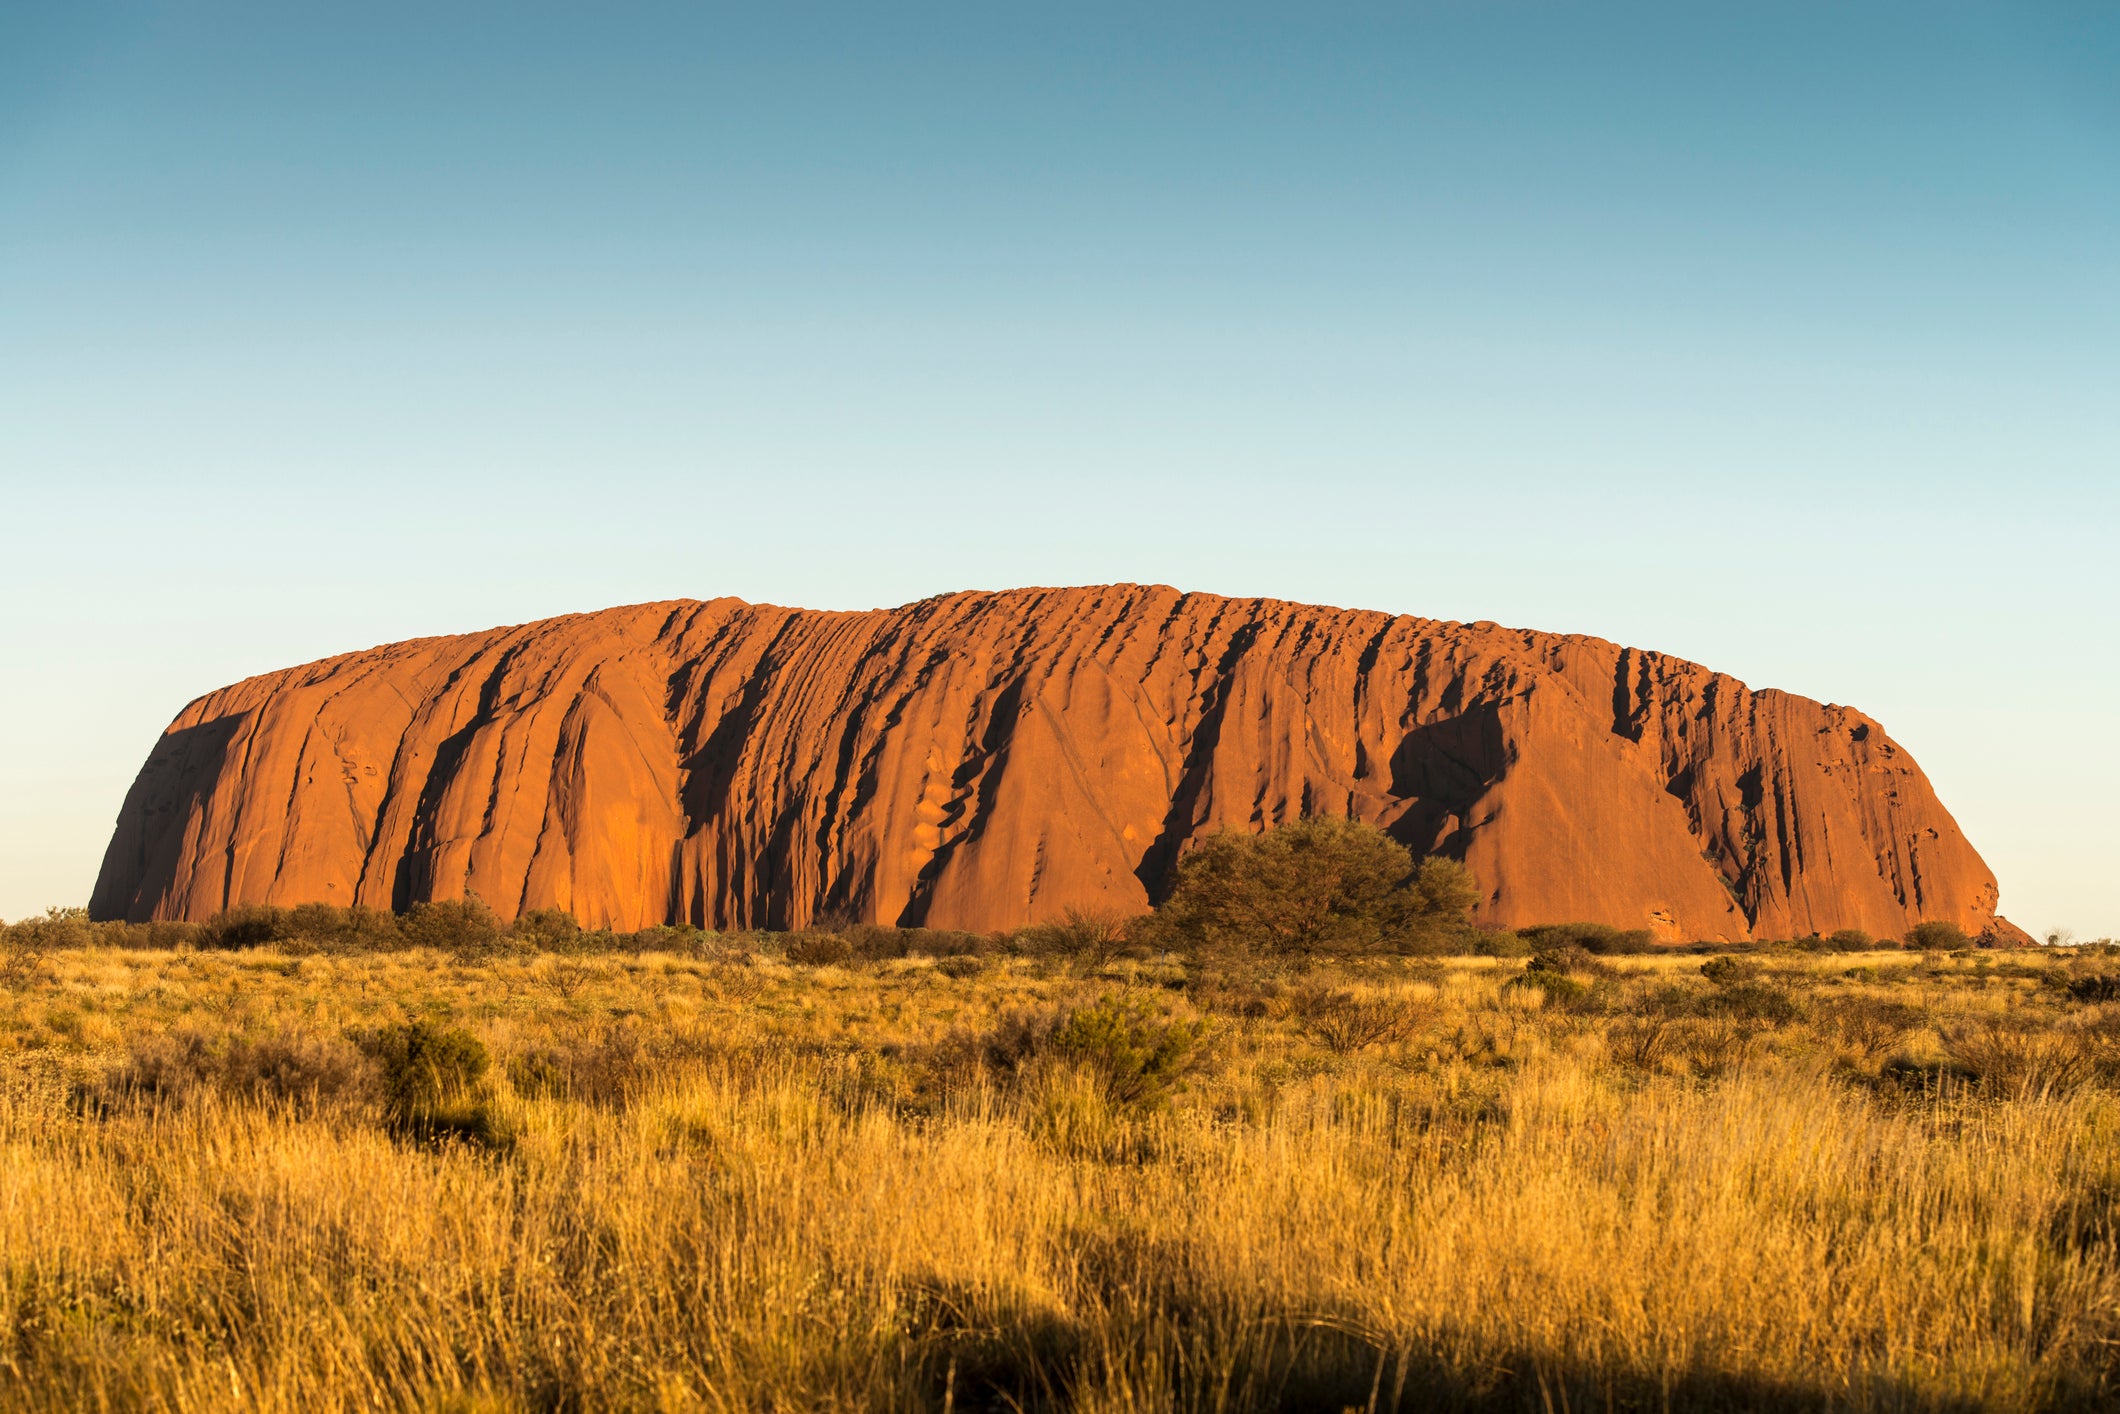 Uluru, formerly known as Ayers Rock, is thought to date back around 550 million years